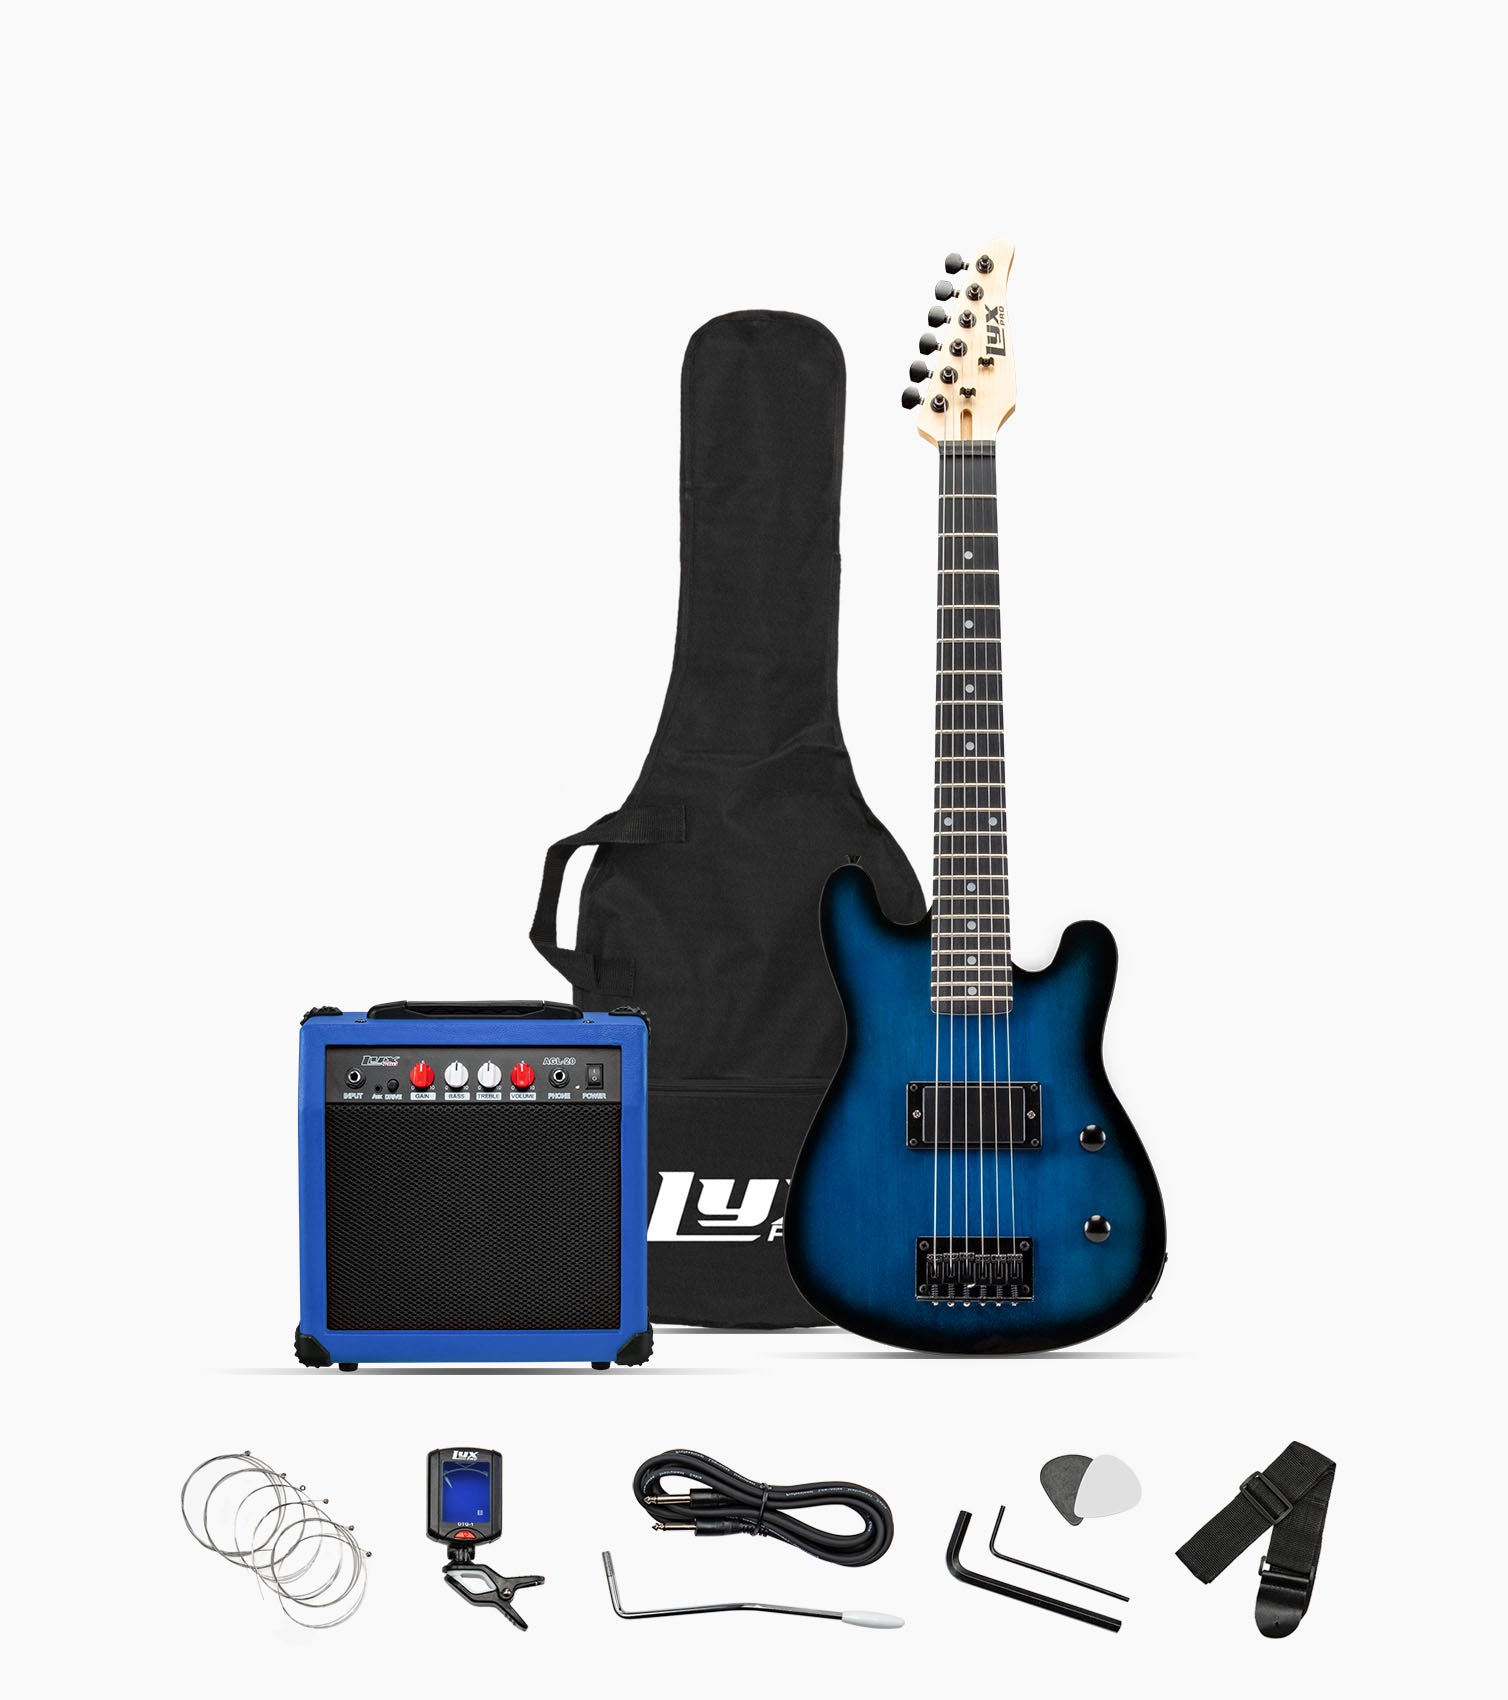 LyxPro 30 Inch Electric Guitar and Starter Kit for Kids with 3/4 Size Beginner's Guitar, Amp, Six Strings, Two Picks, Shoulder Strap, Digital Clip On